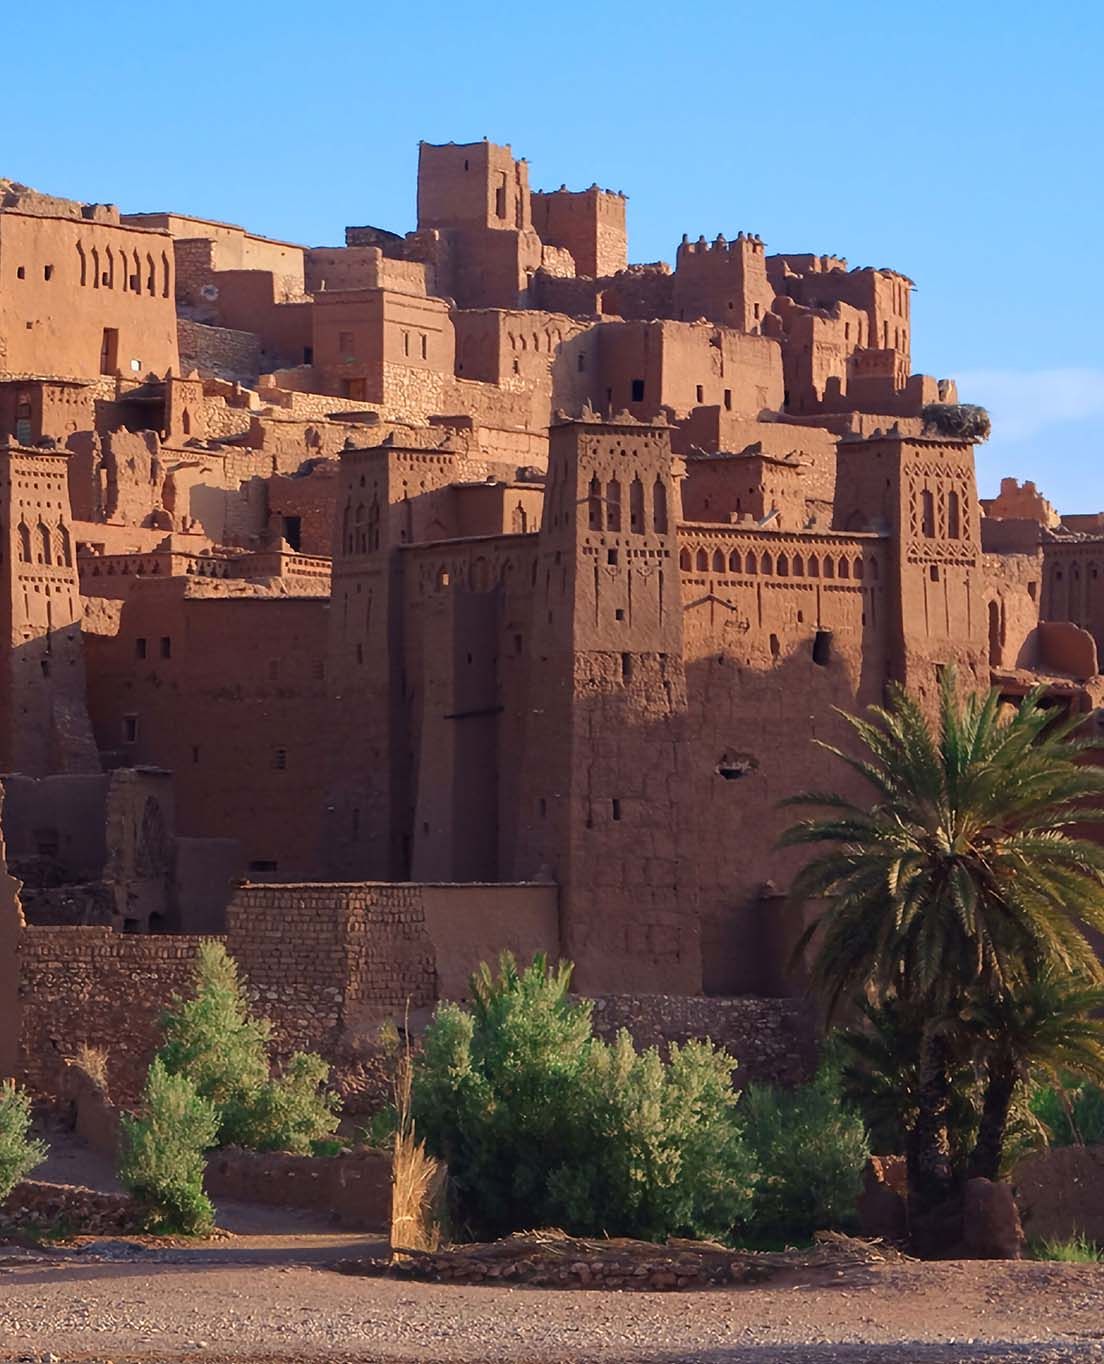 Morocco at a glance